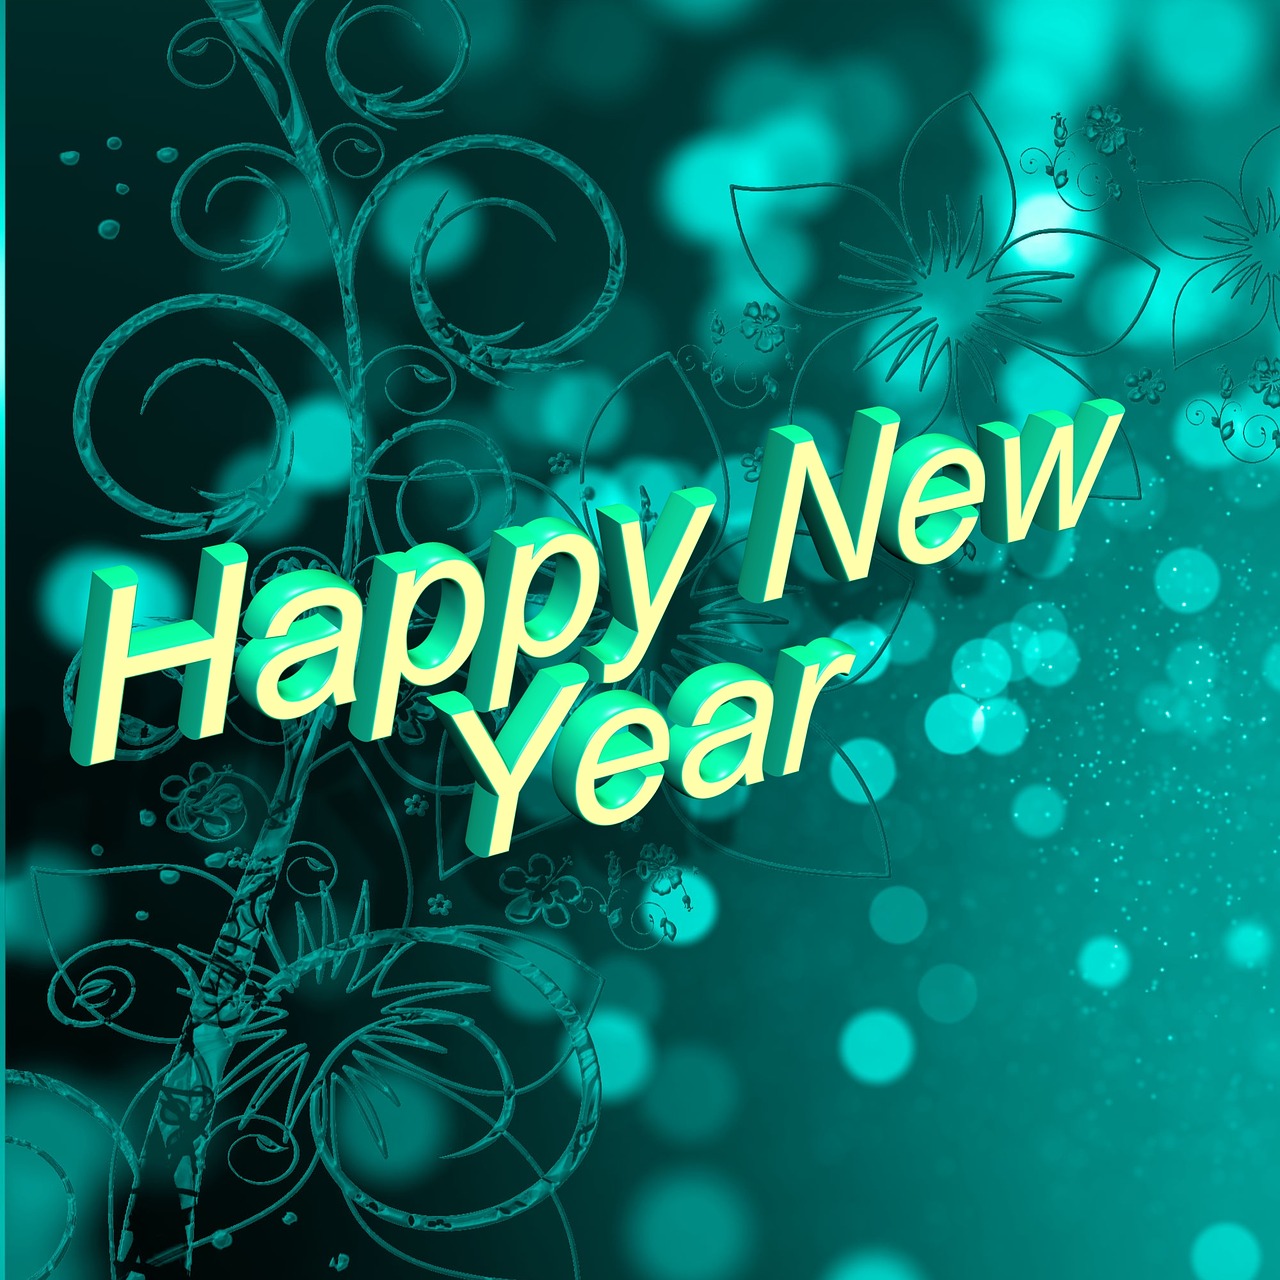 download-free-photo-of-font-lettering-happy-new-year-new-year-s-day